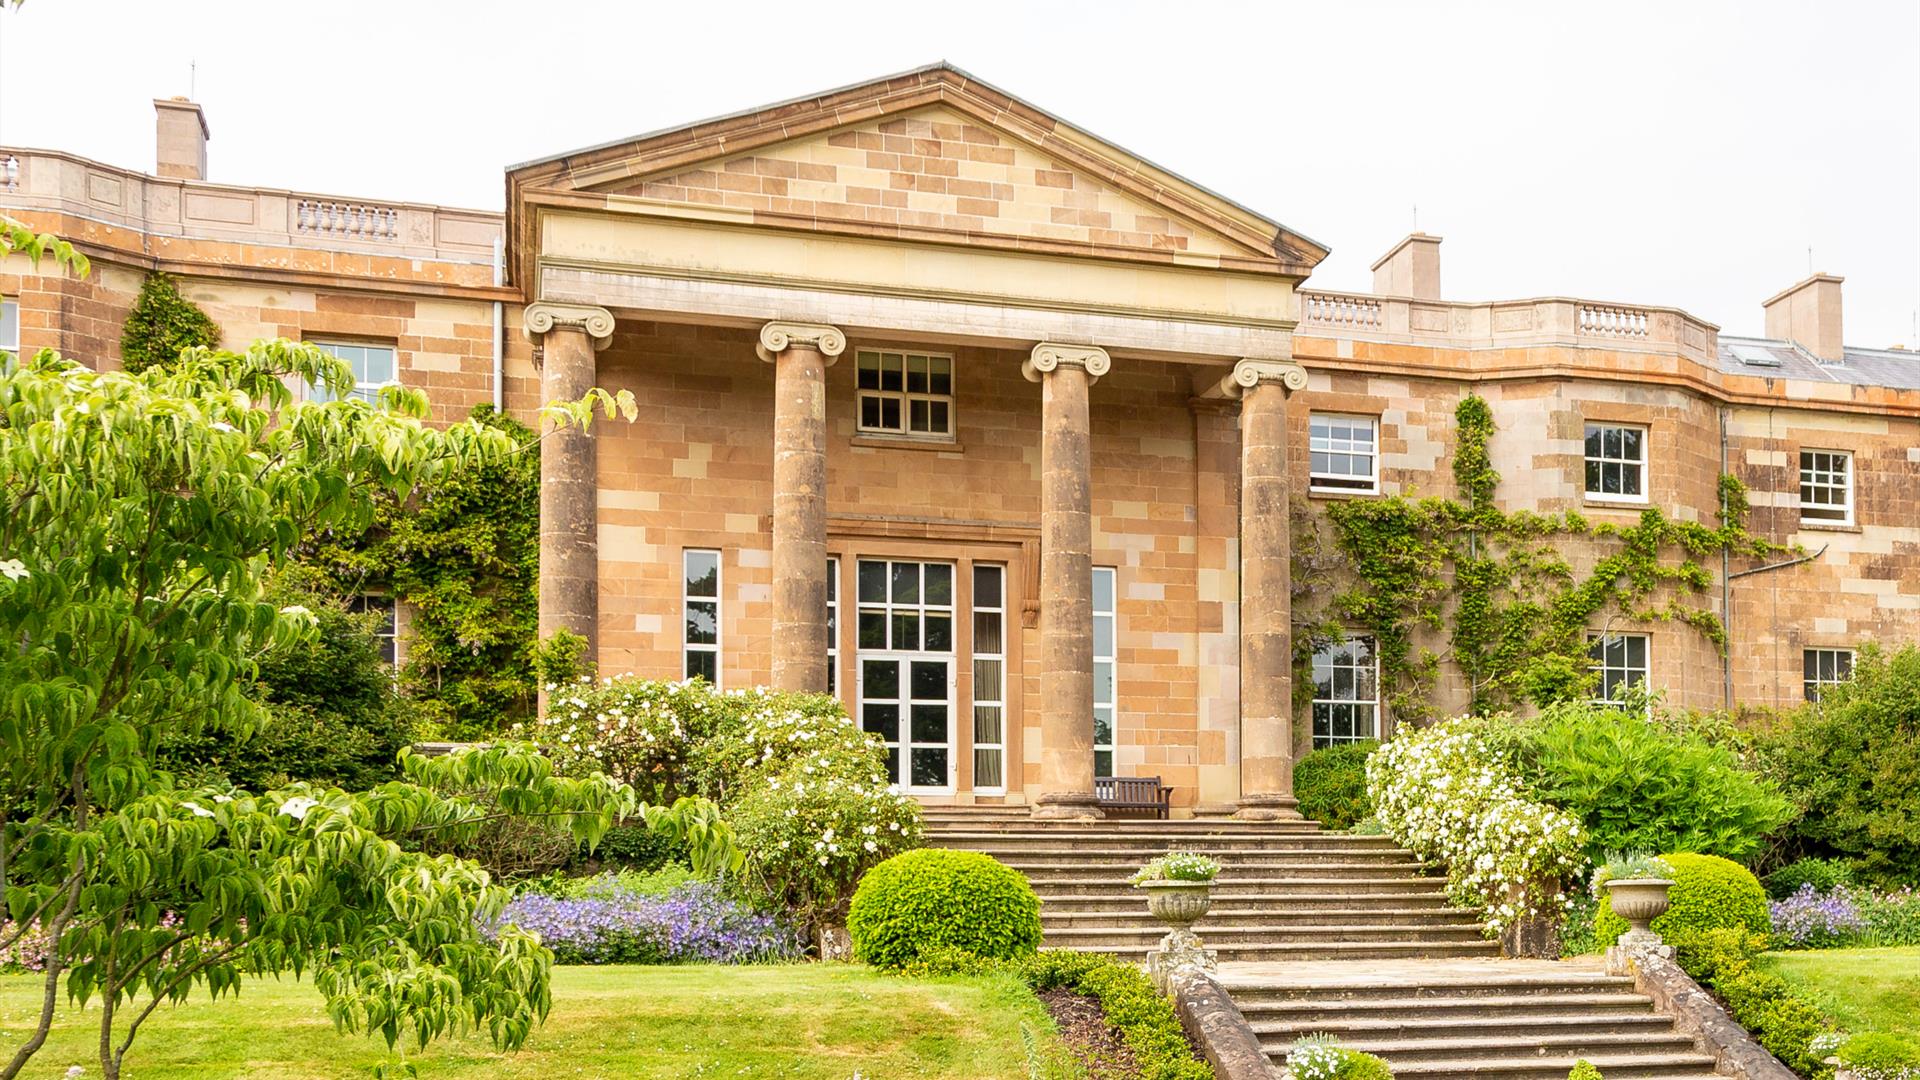 Shows image of front of Hillsborough Castle and gardens